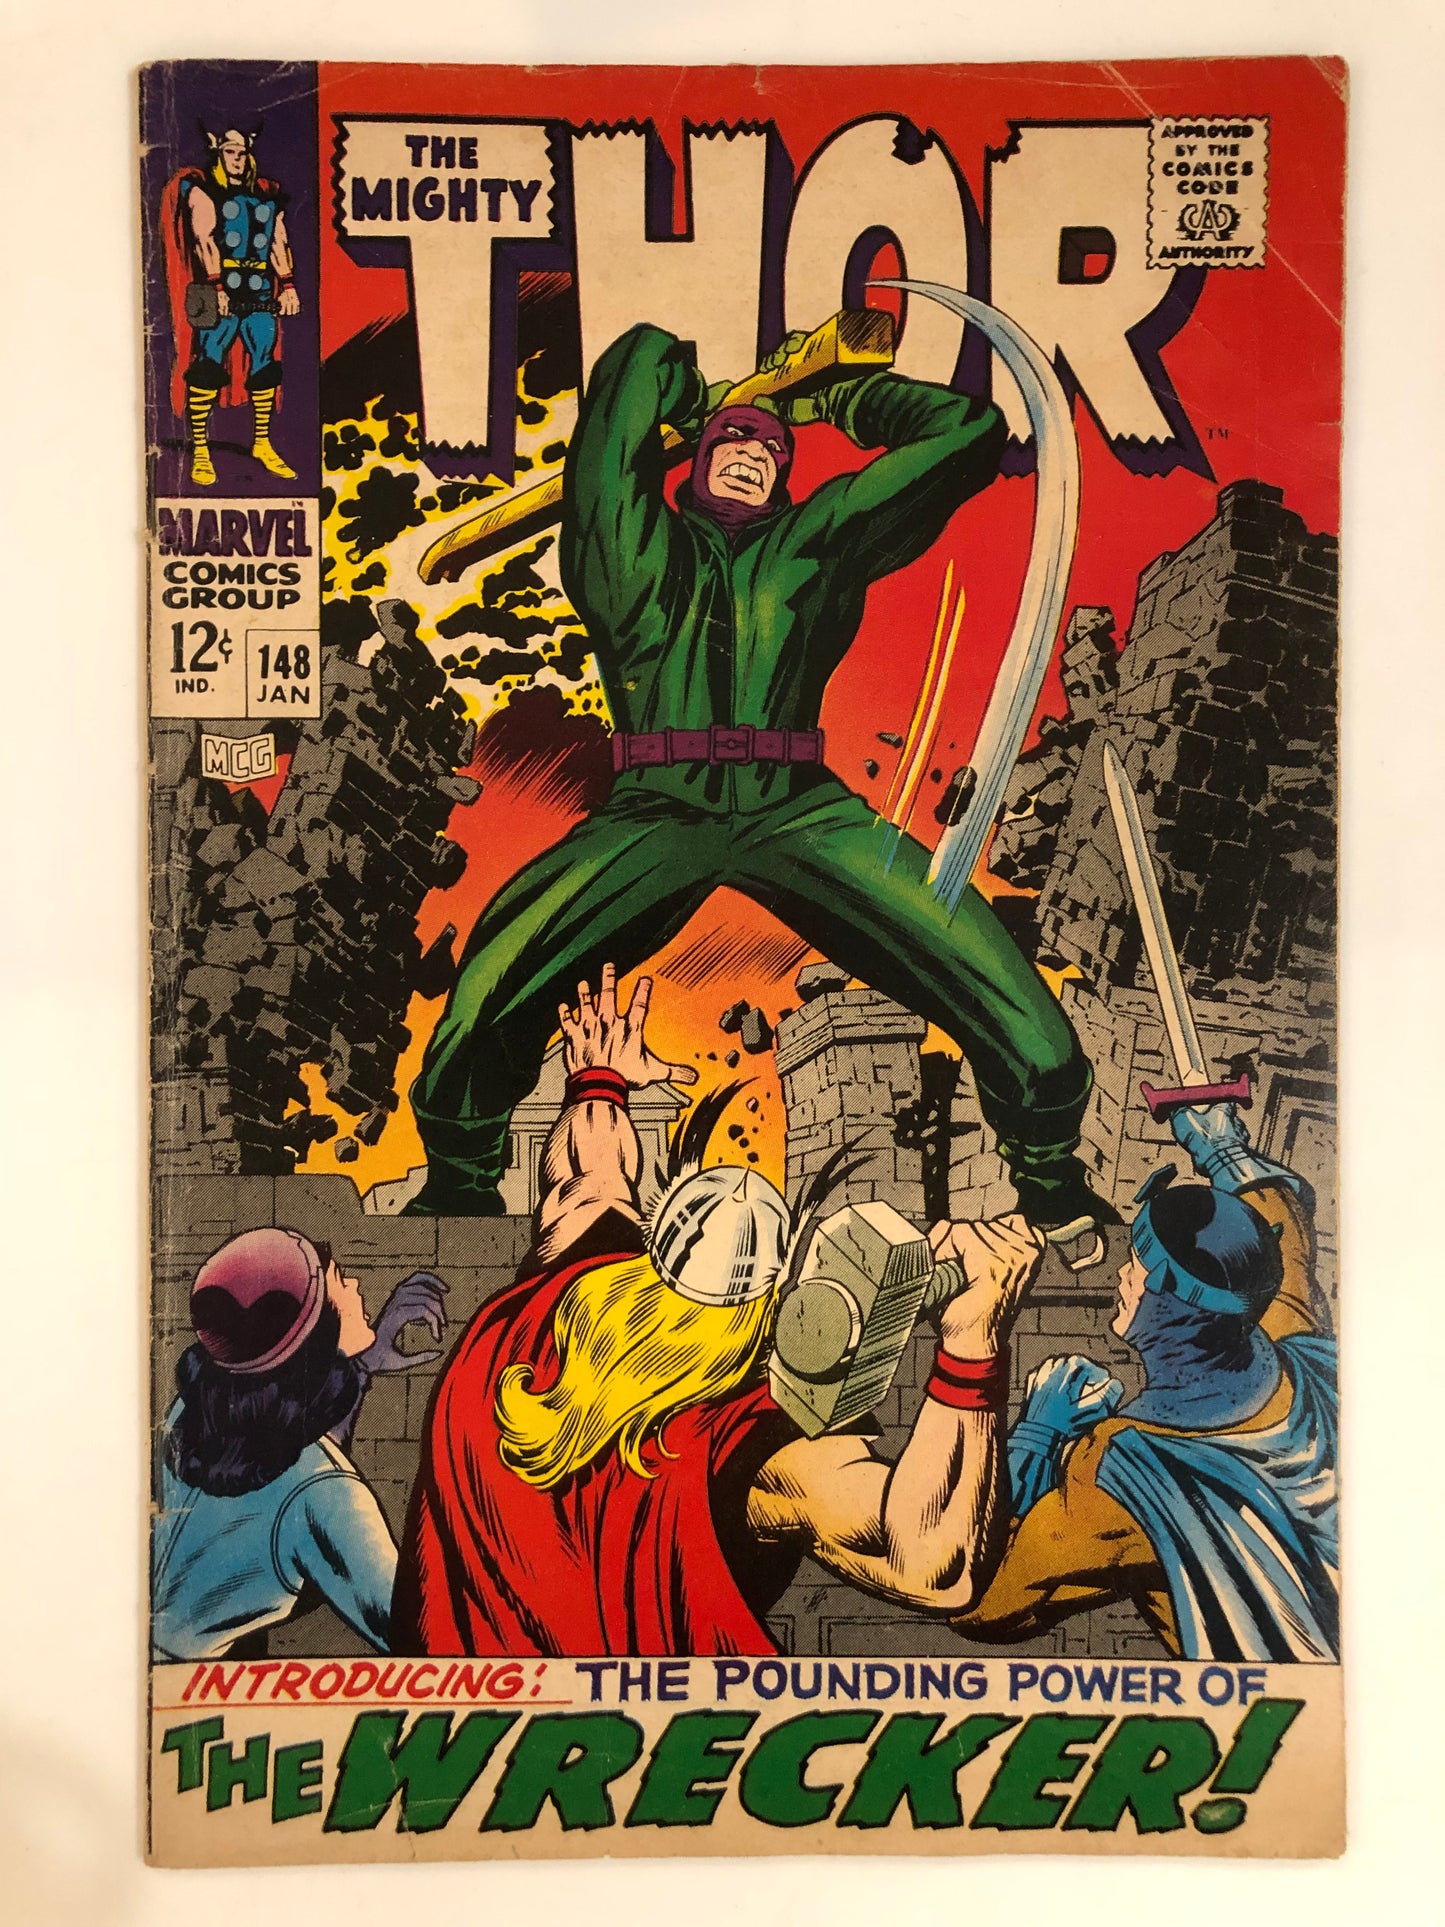 The Mighty Thor #148